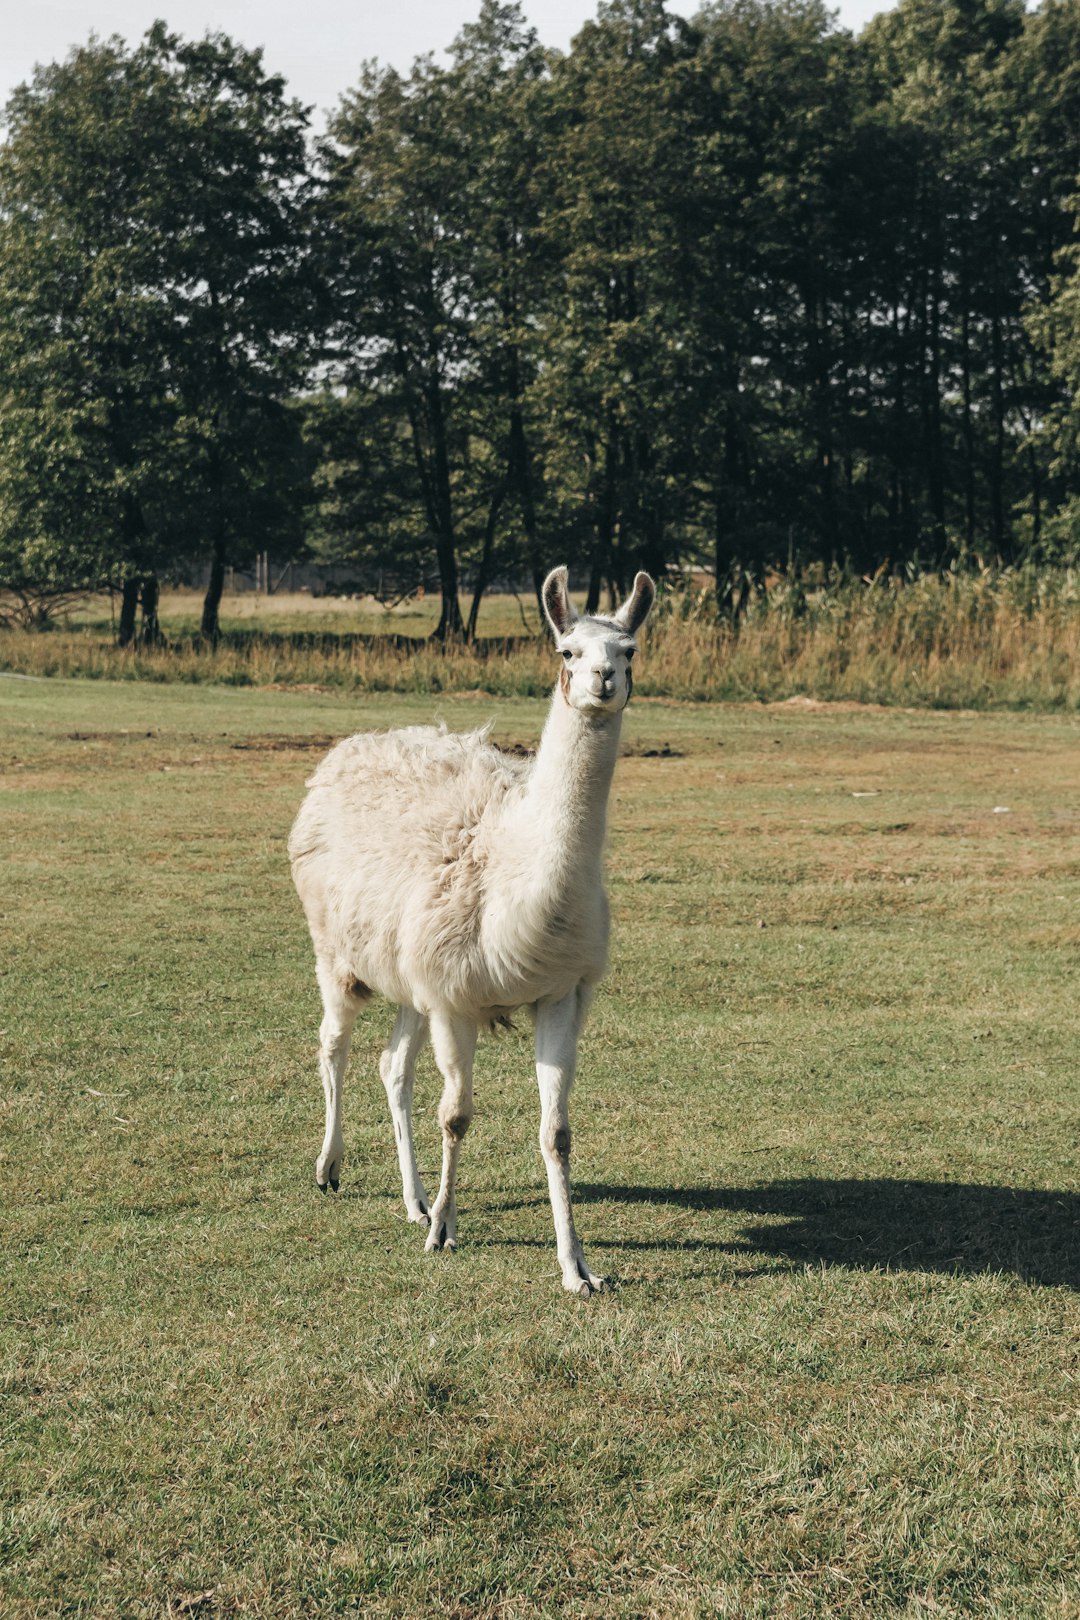 white llama on green grass field during daytime